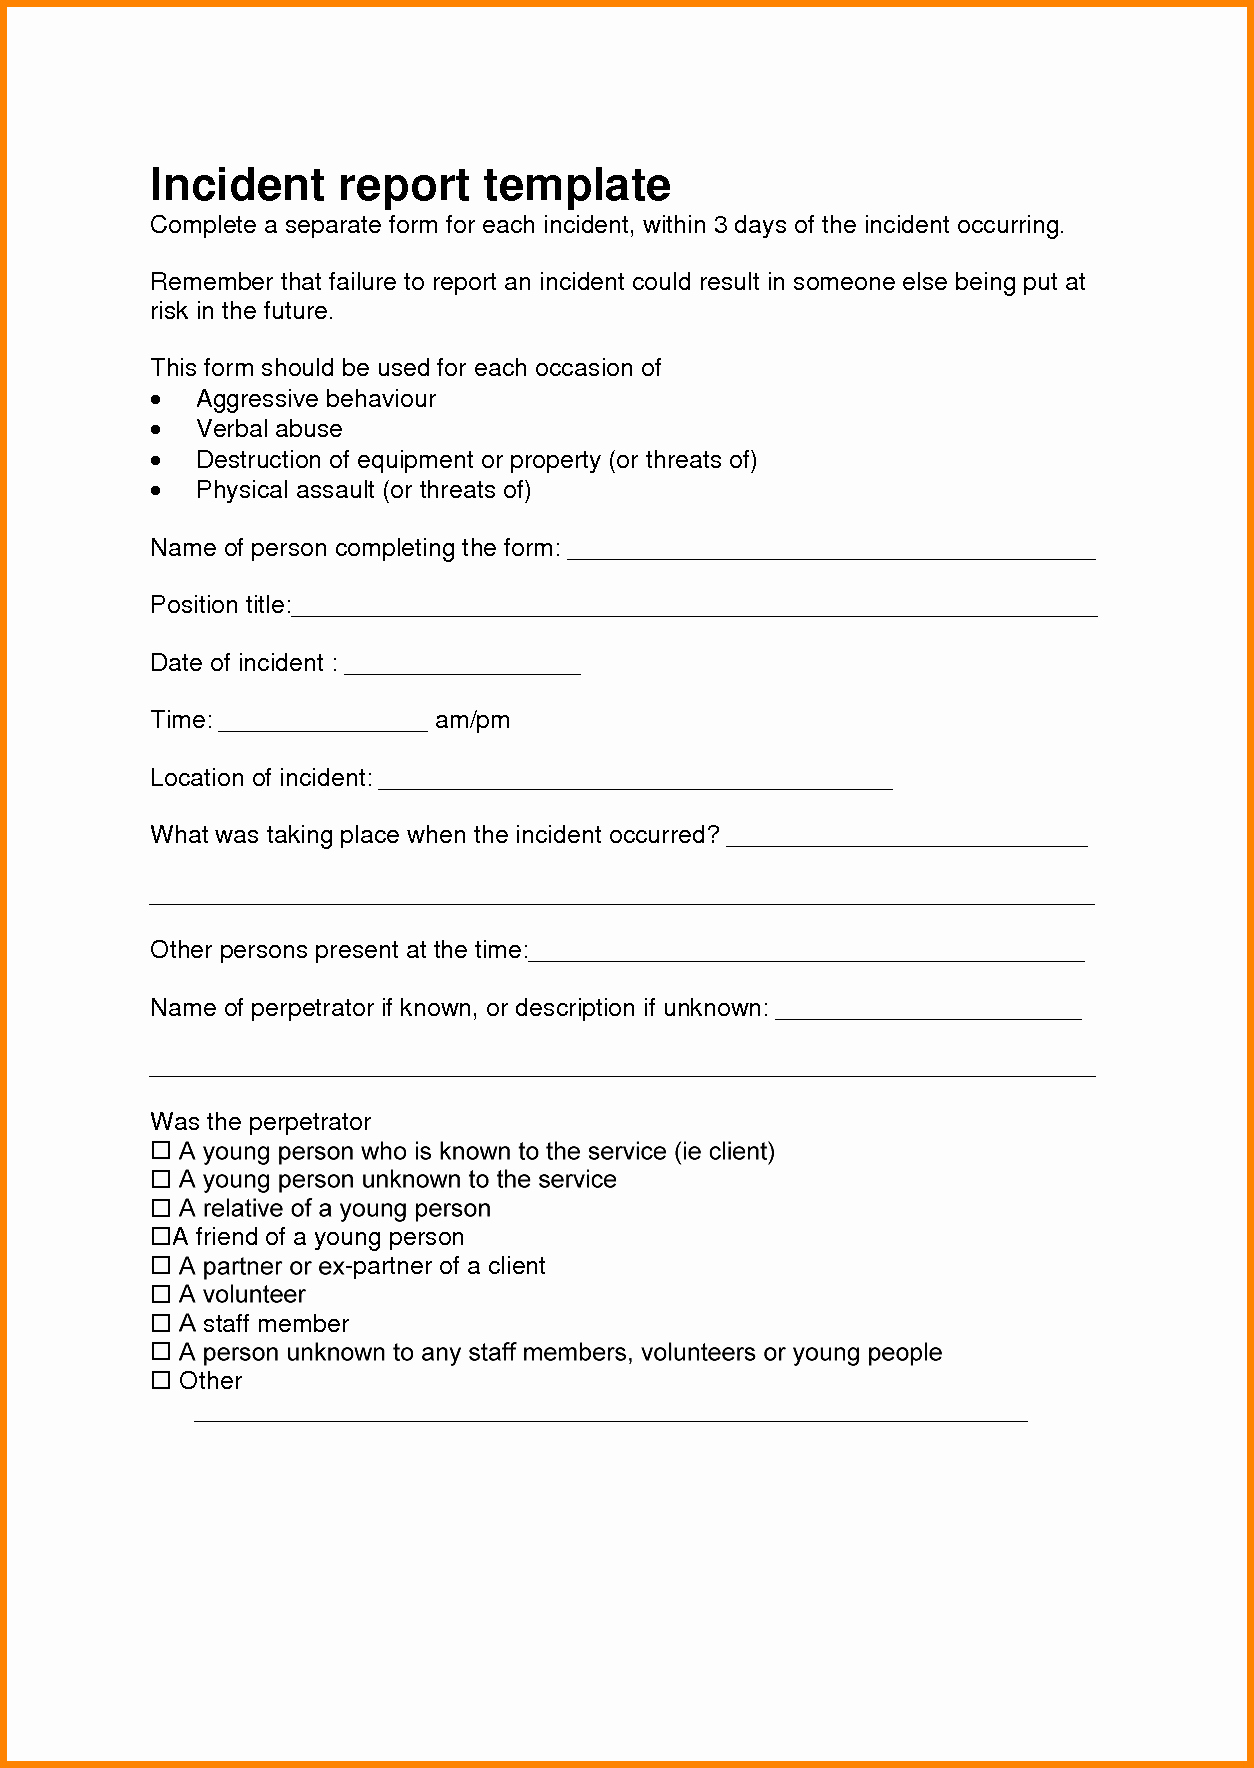 Incident Report Template Word Inspirational Incident Report Template Microsoft Word